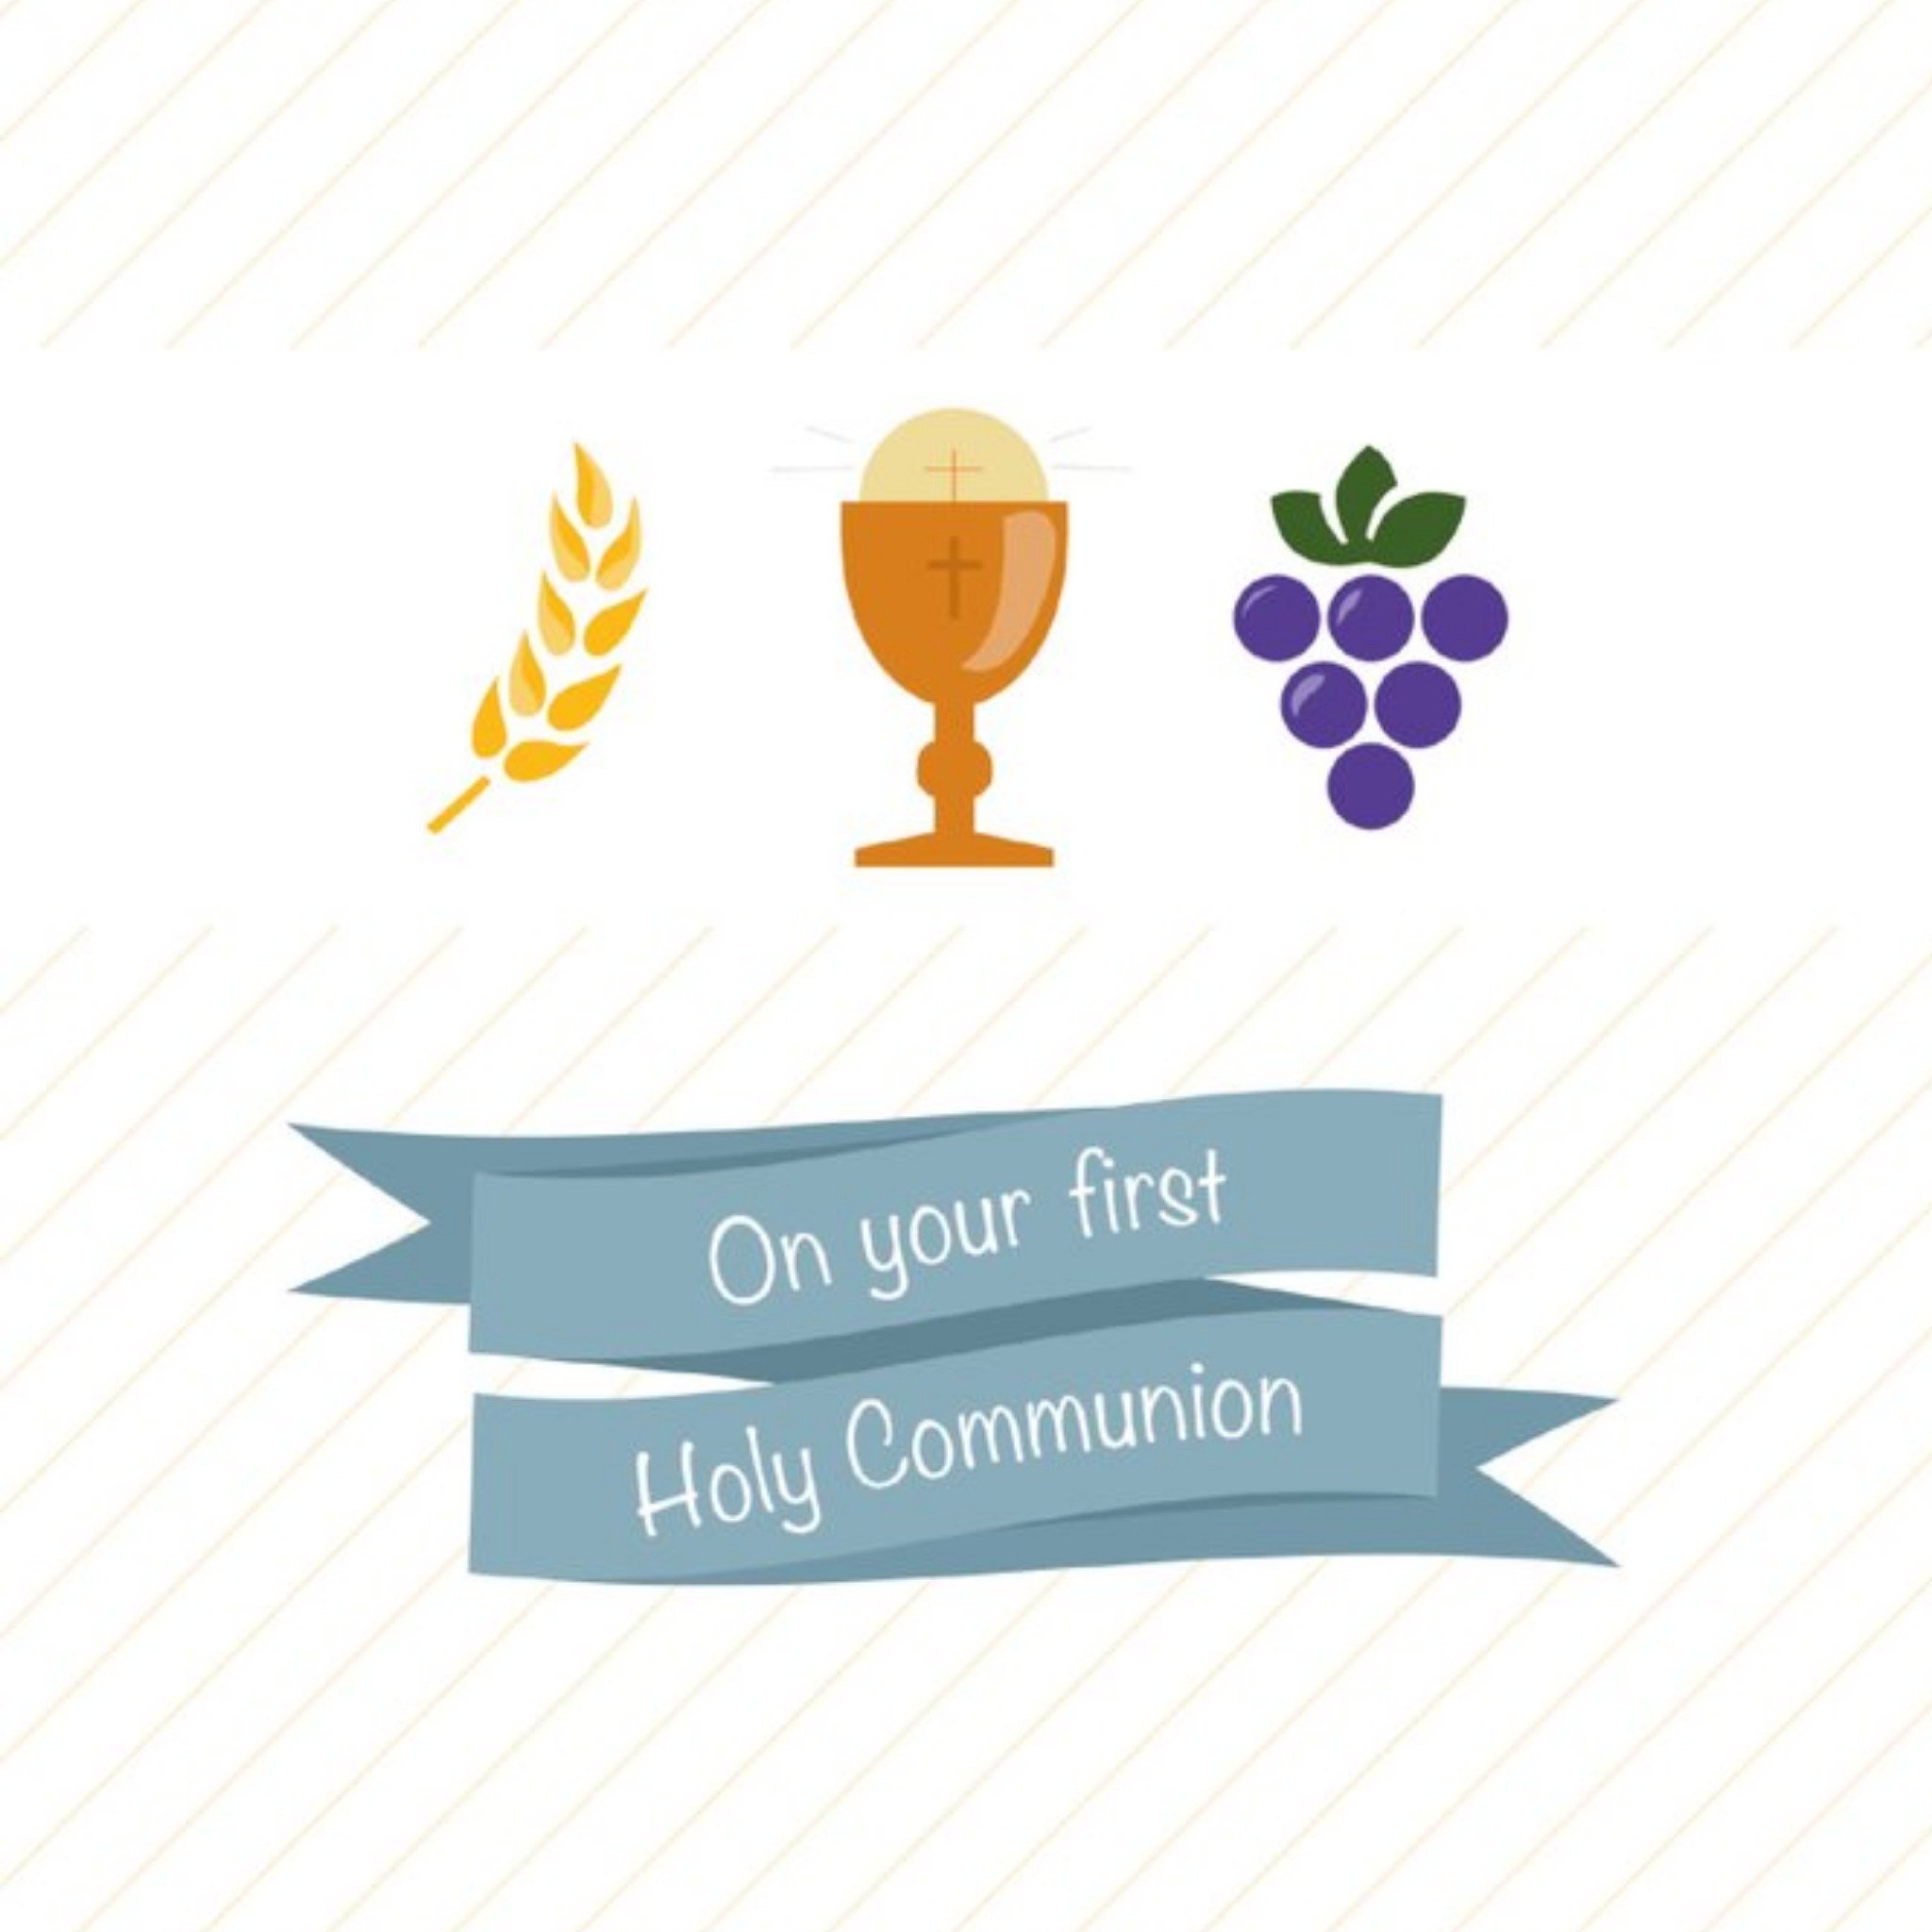 Moonpig On Your Holy Communion Wheat Goblet Grape Card, Square